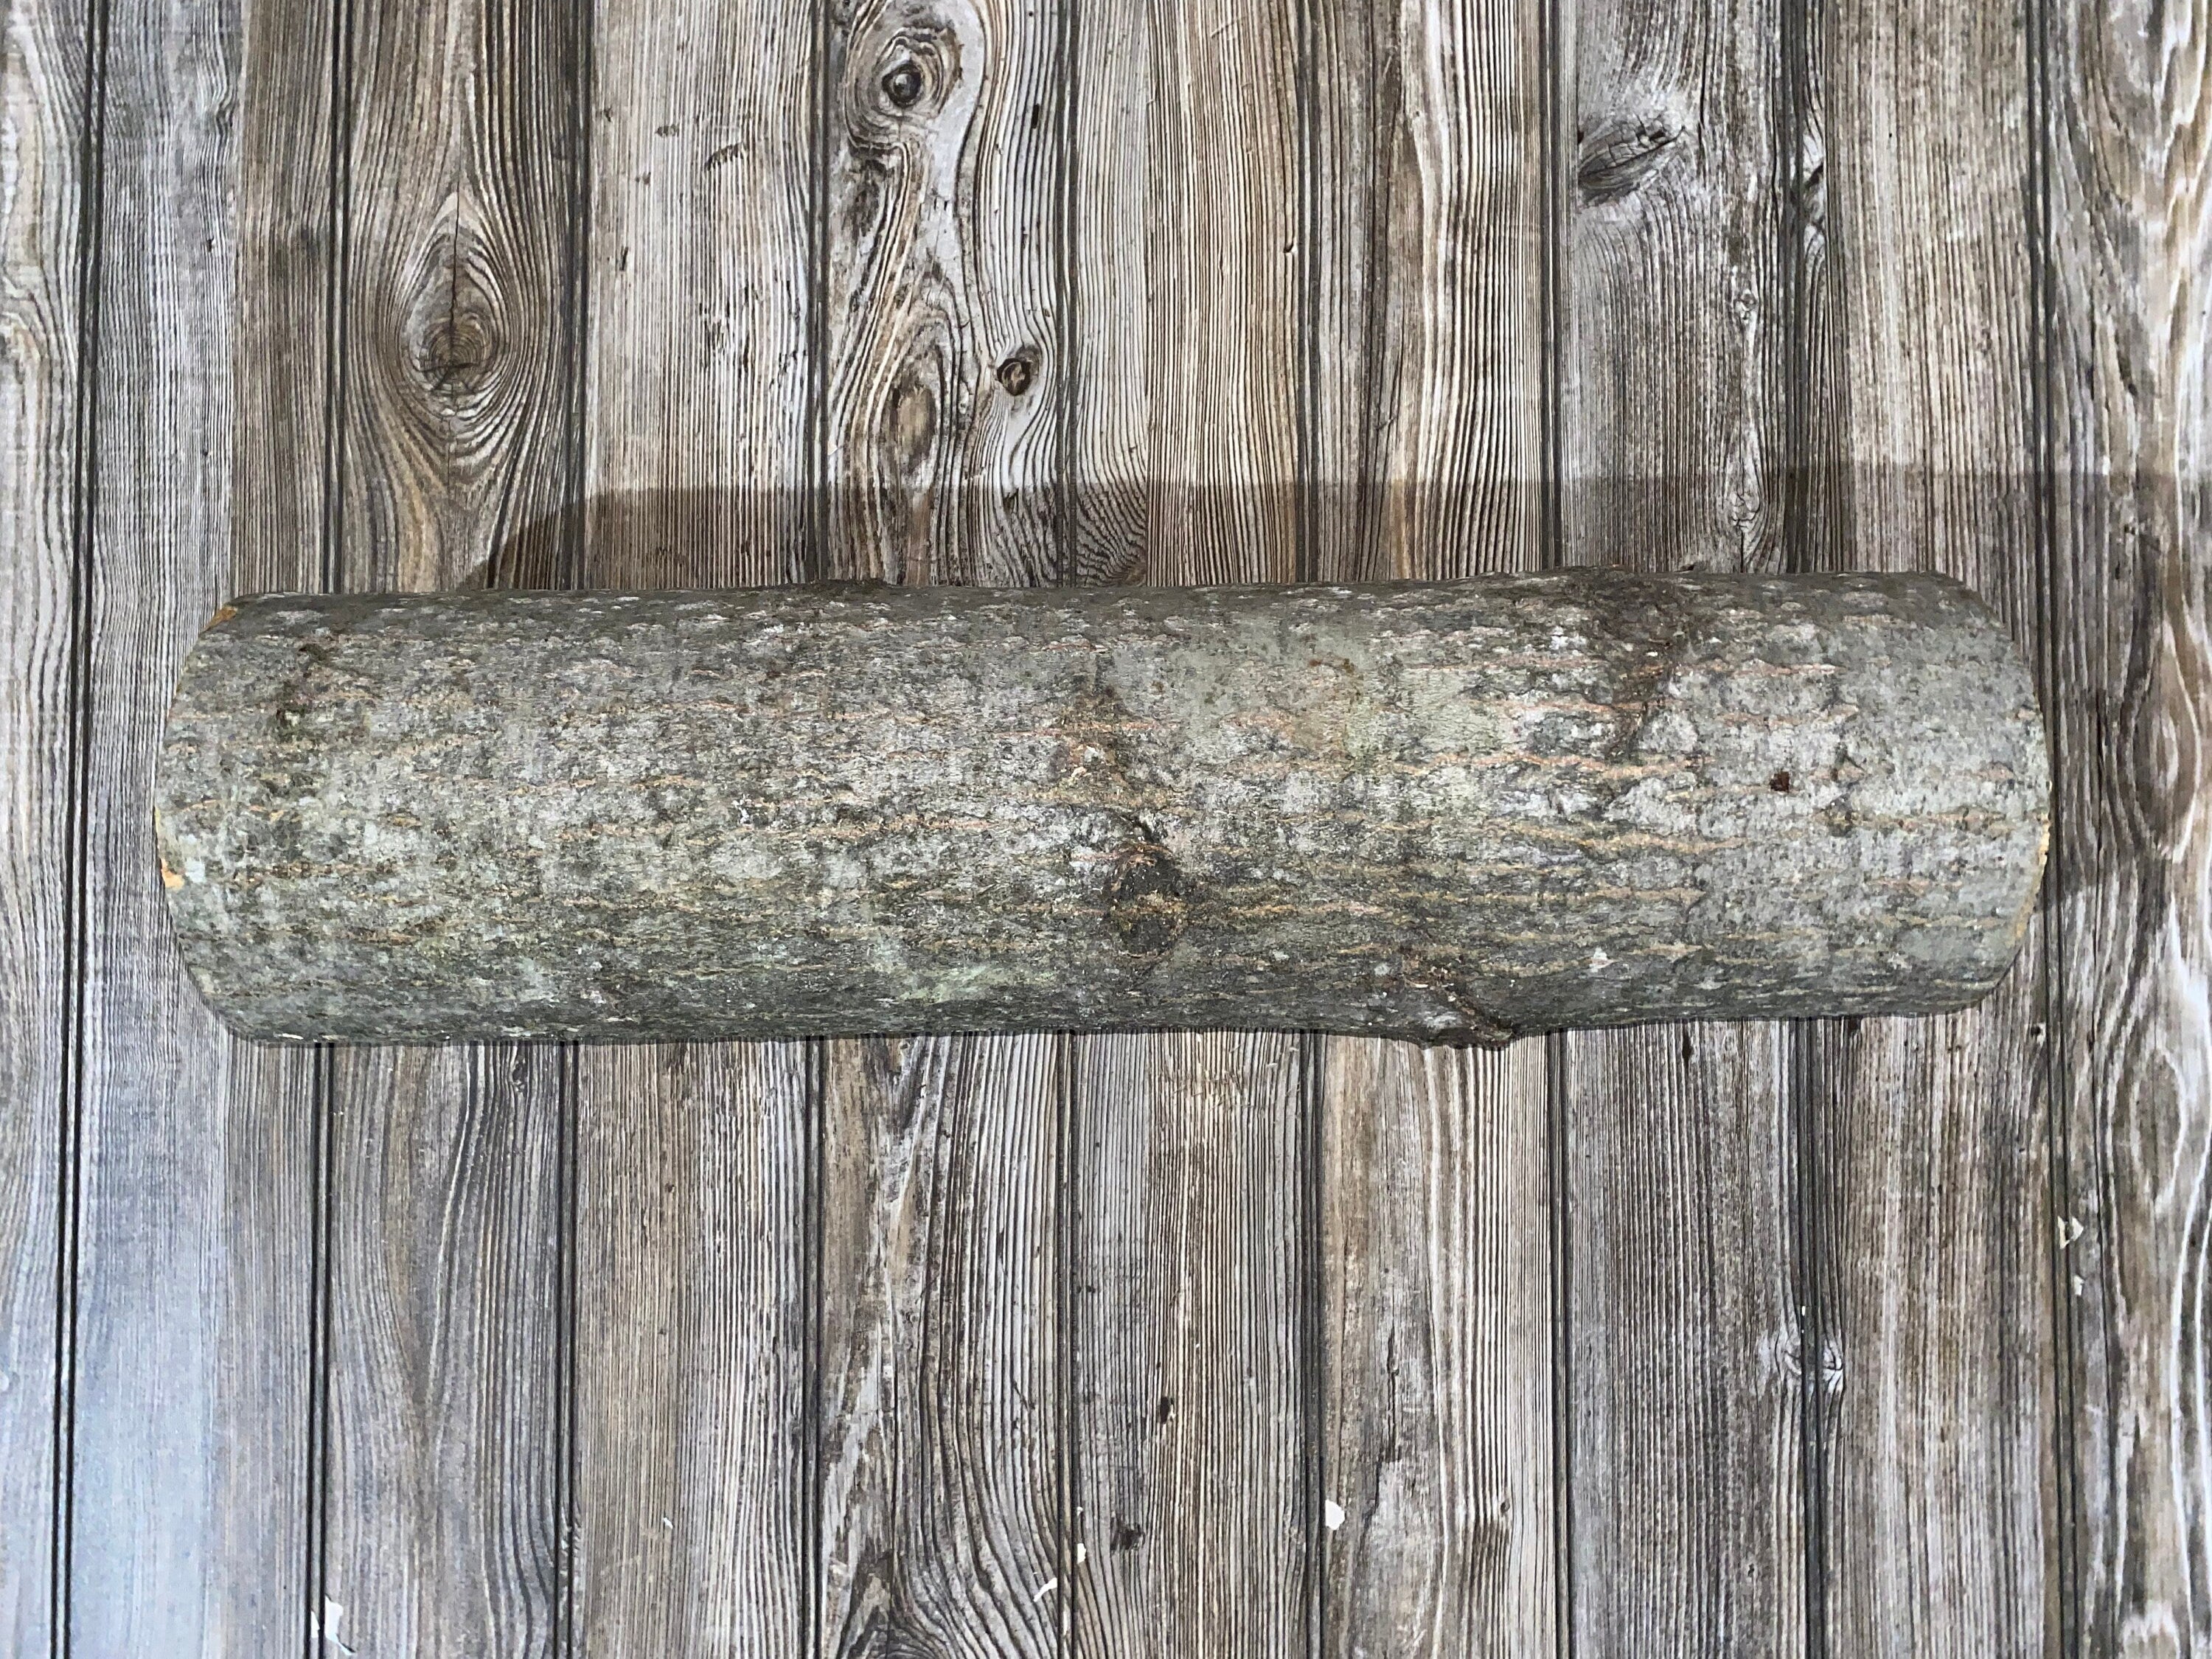 Aspen Log, Popple, About 24 Inches Long by 6 Inches Wide and 6 Inches Thick